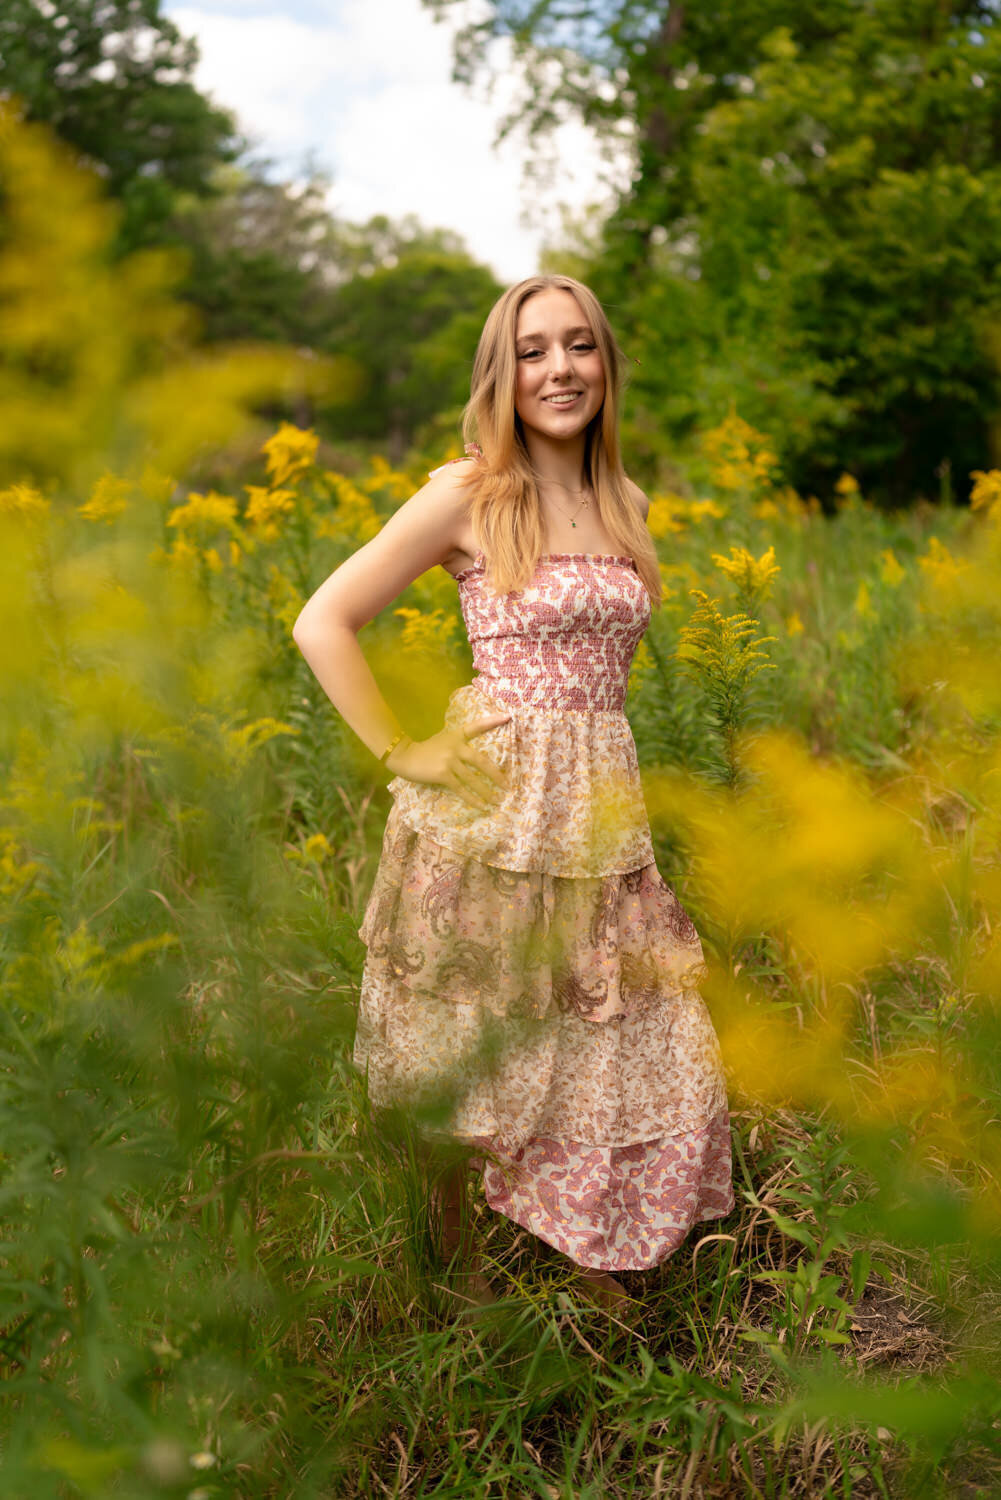 Senior girl stands in a flower field in a pink sundress.